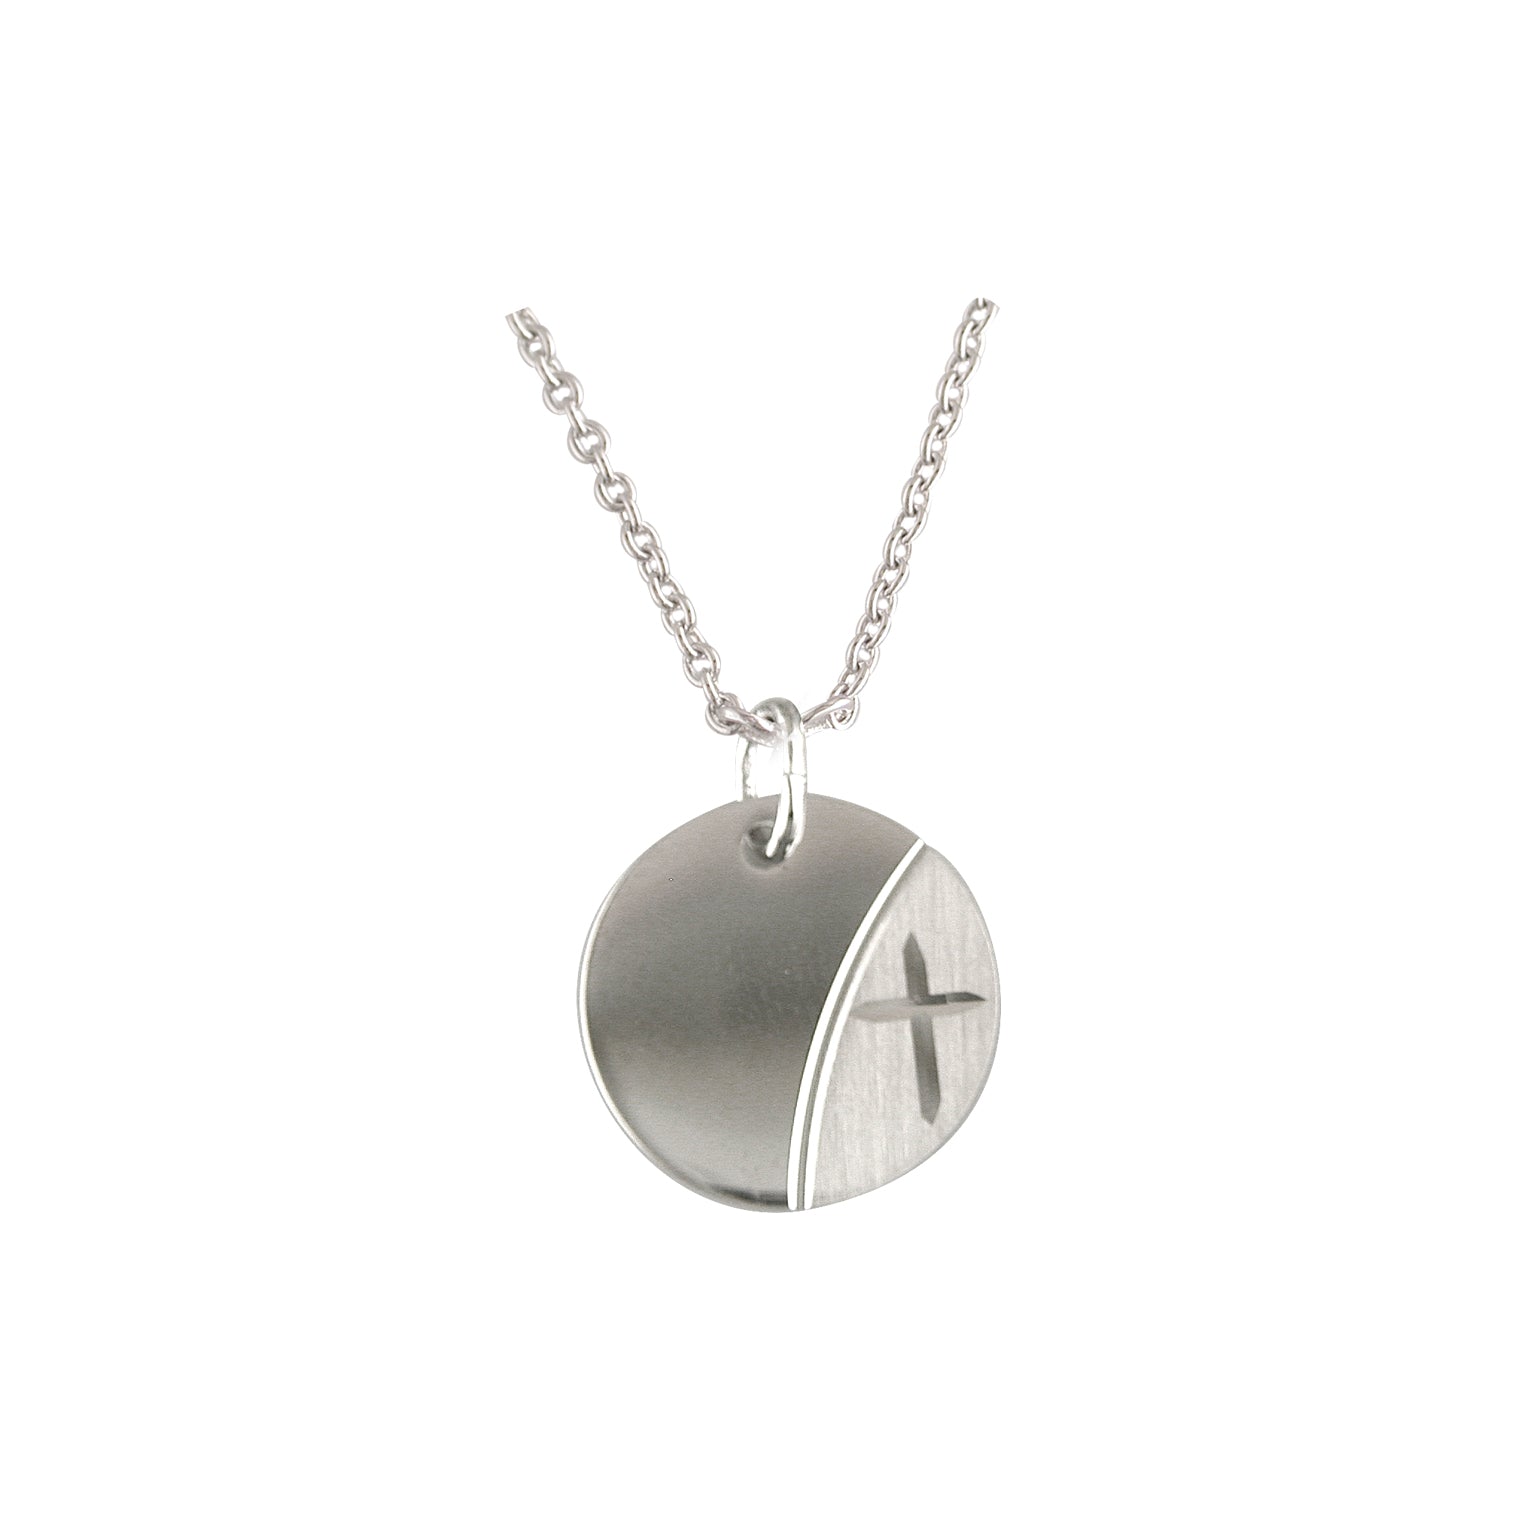 Silver Disc Necklace with Cross Engraving - John Ross Jewellers